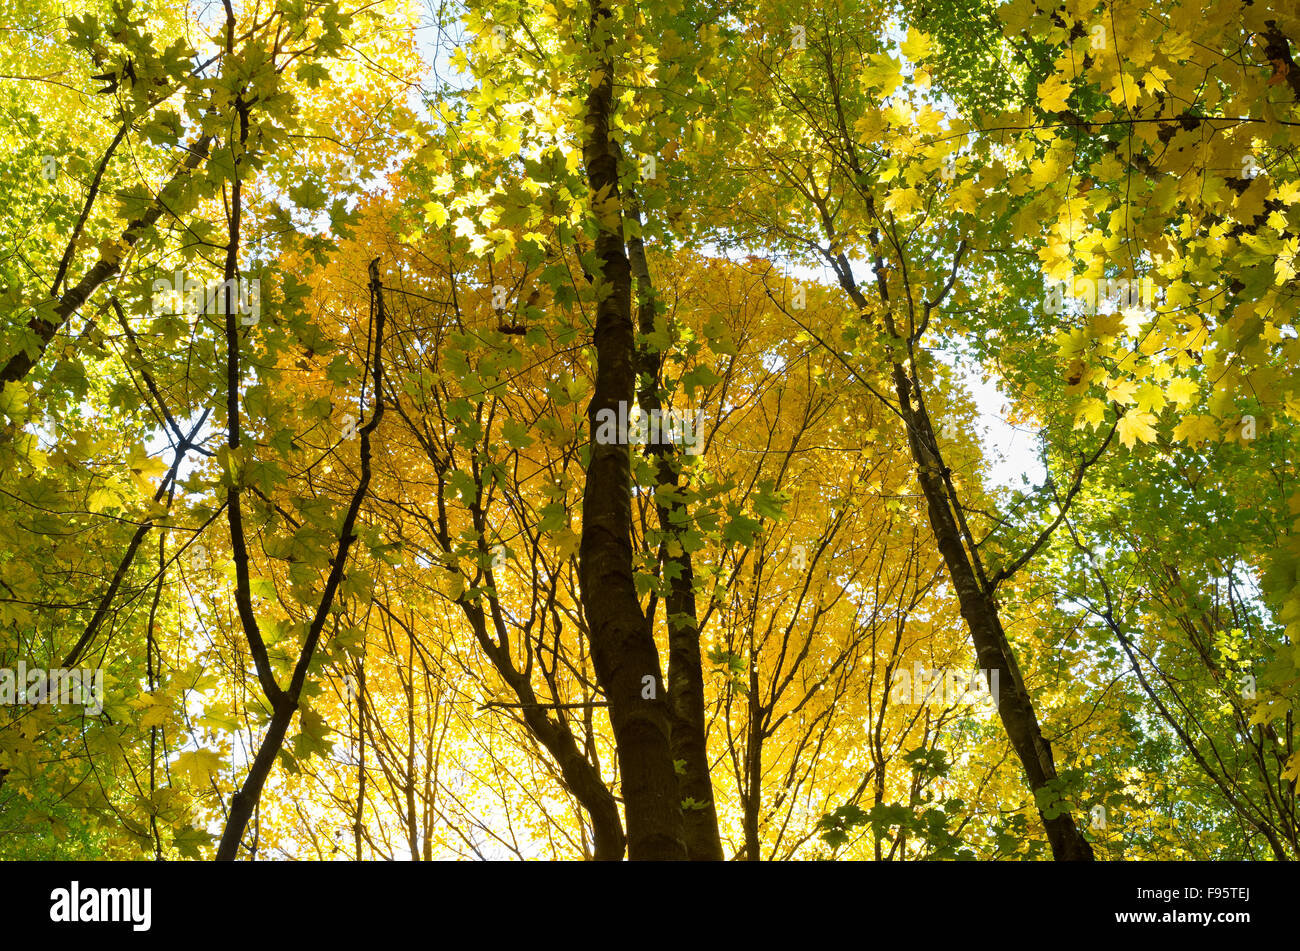 in the forest with backlit canopy glowing with golden yellow autumn colors of maple and deciduous tree leaves Stock Photo